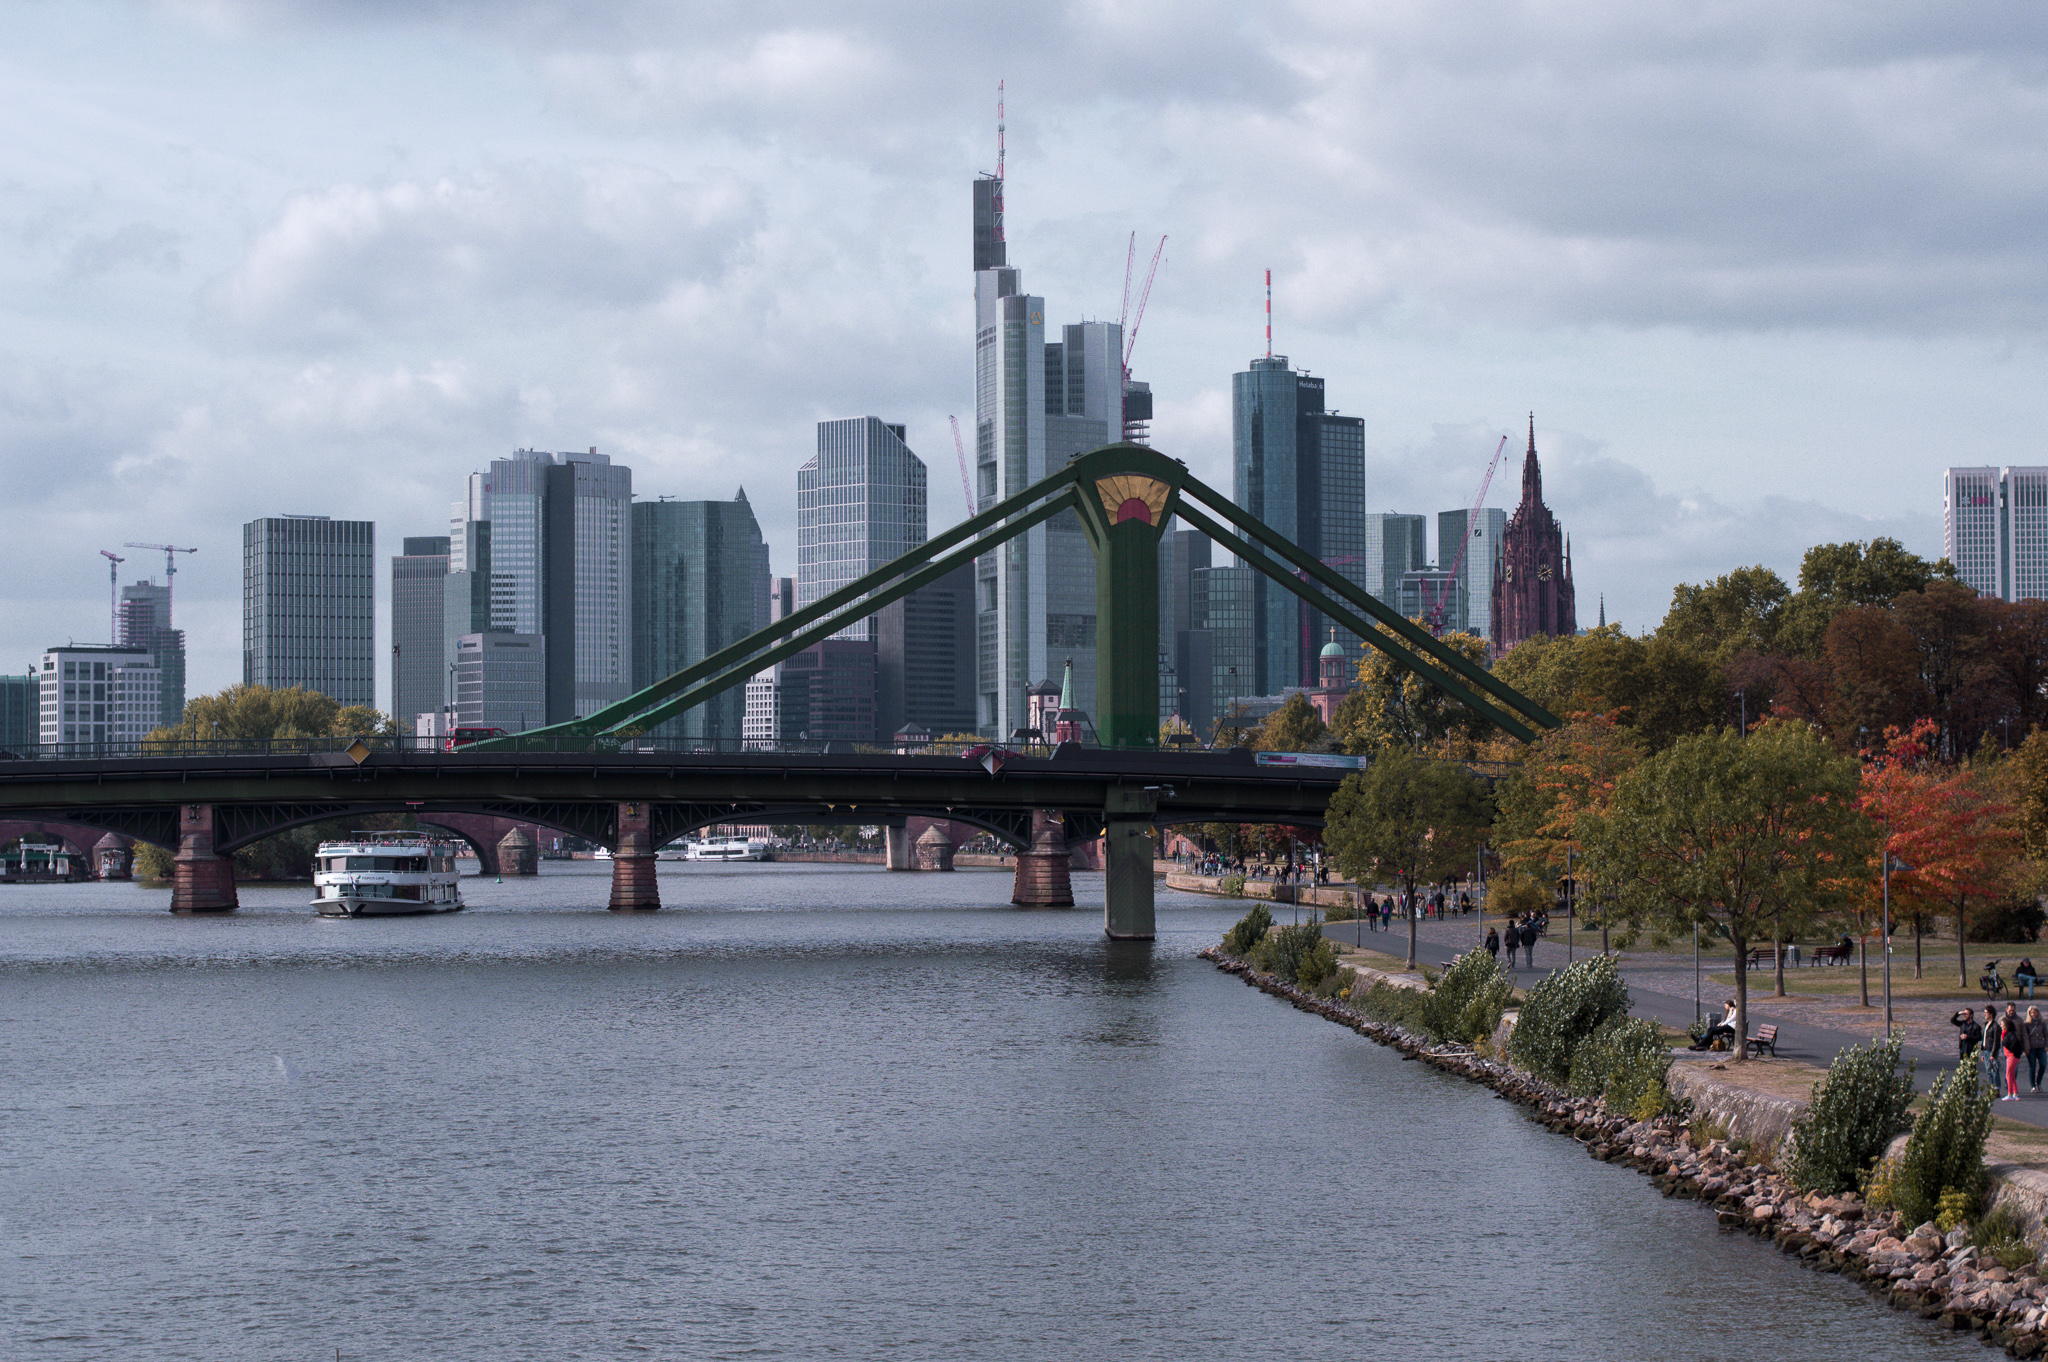 View of the Frankfurt Skyline from the Primus Linie